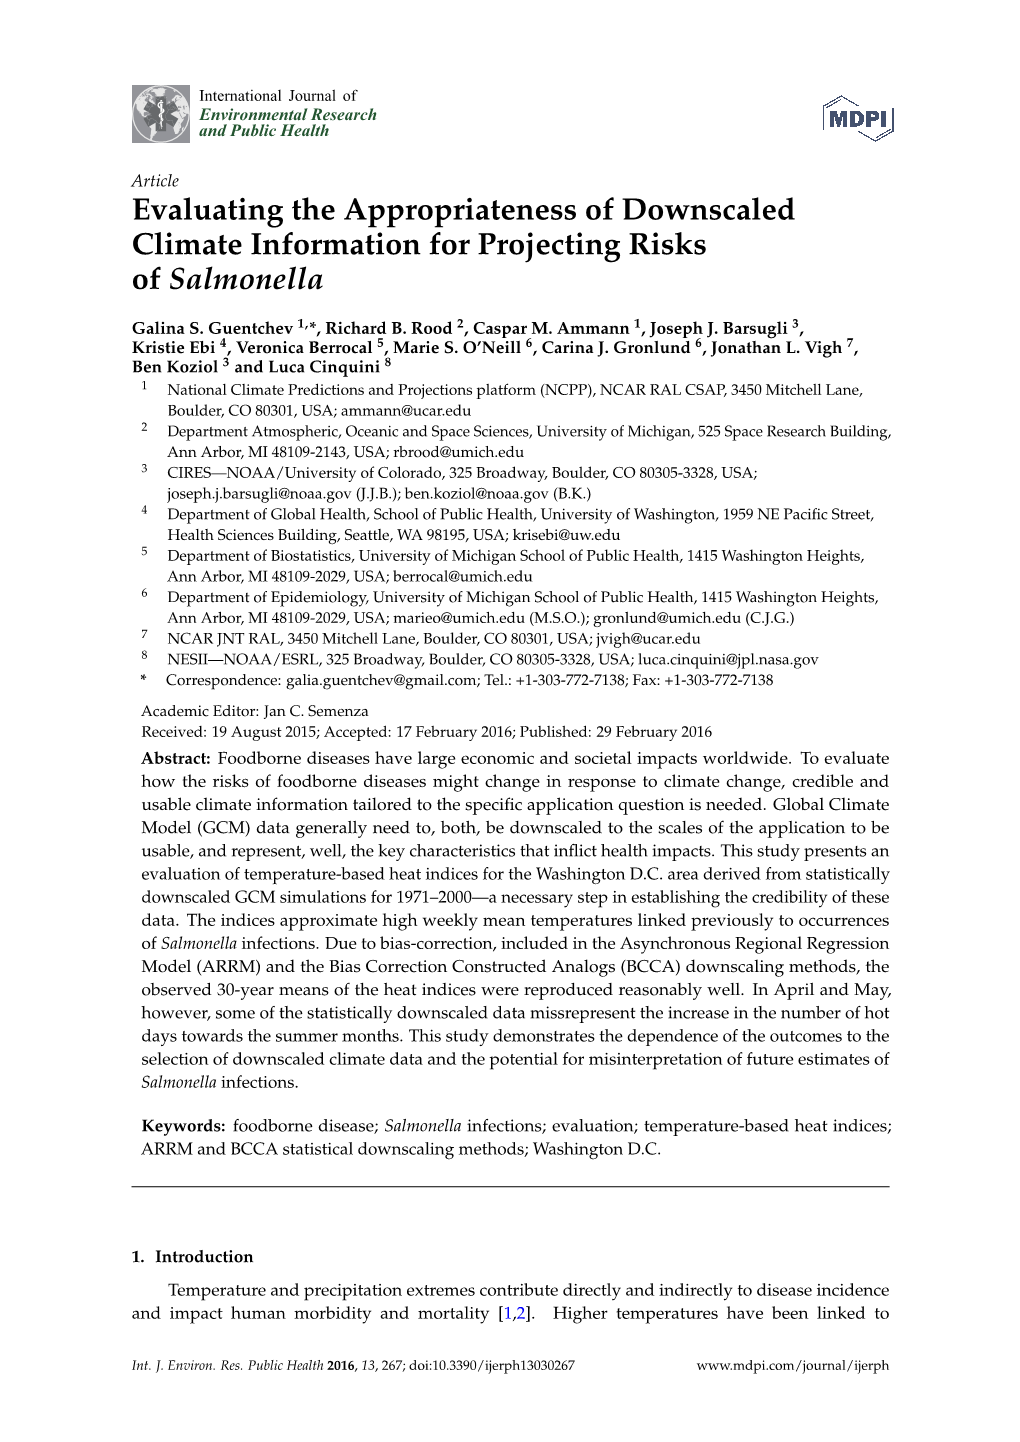 Evaluating the Appropriateness of Downscaled Climate Information for Projecting Risks of Salmonella